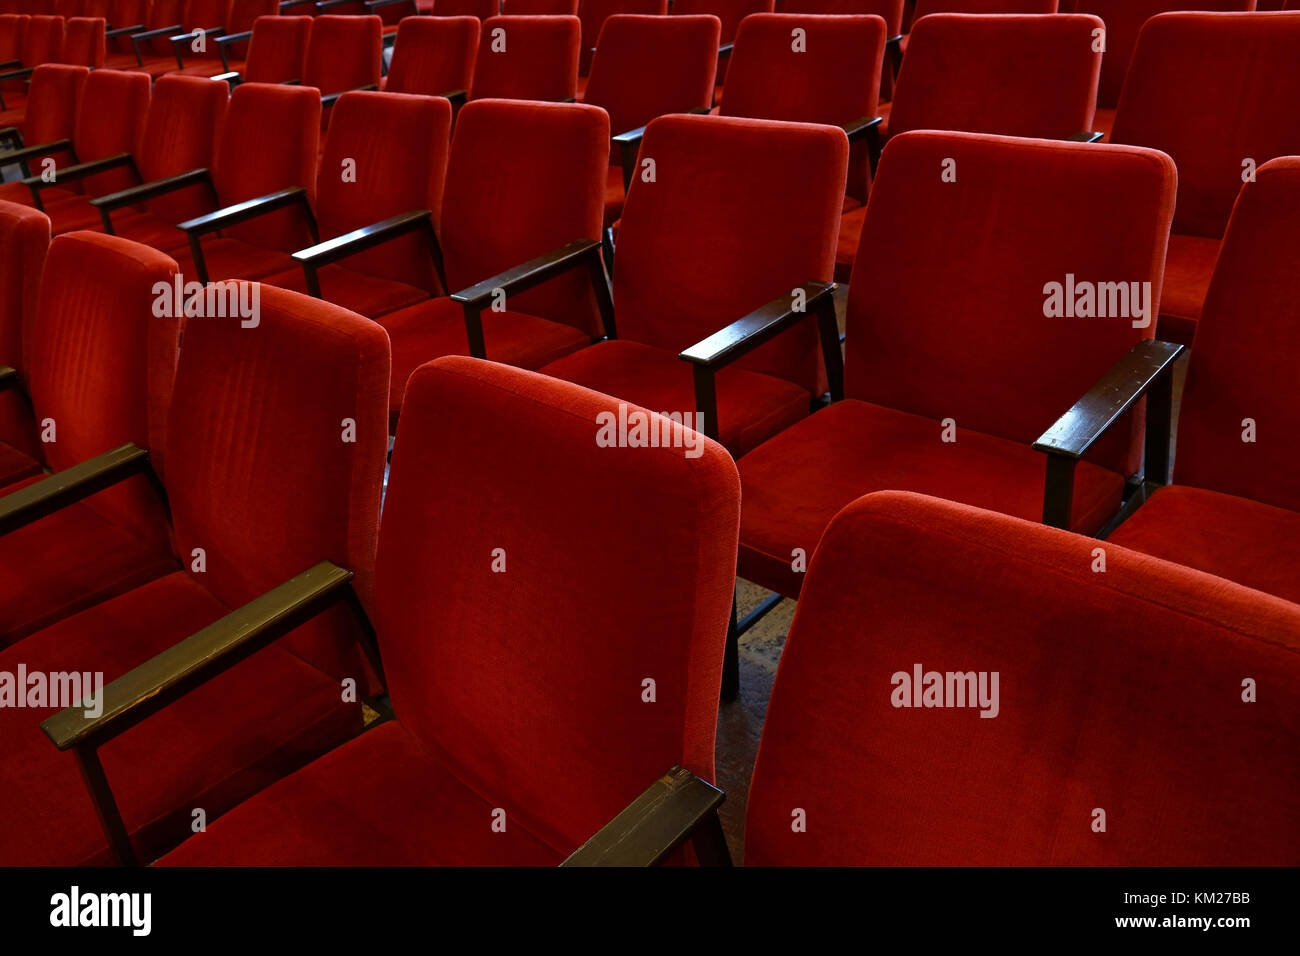 Close up red soft chair seats in a row, personal perspective, high angle view Stock Photo